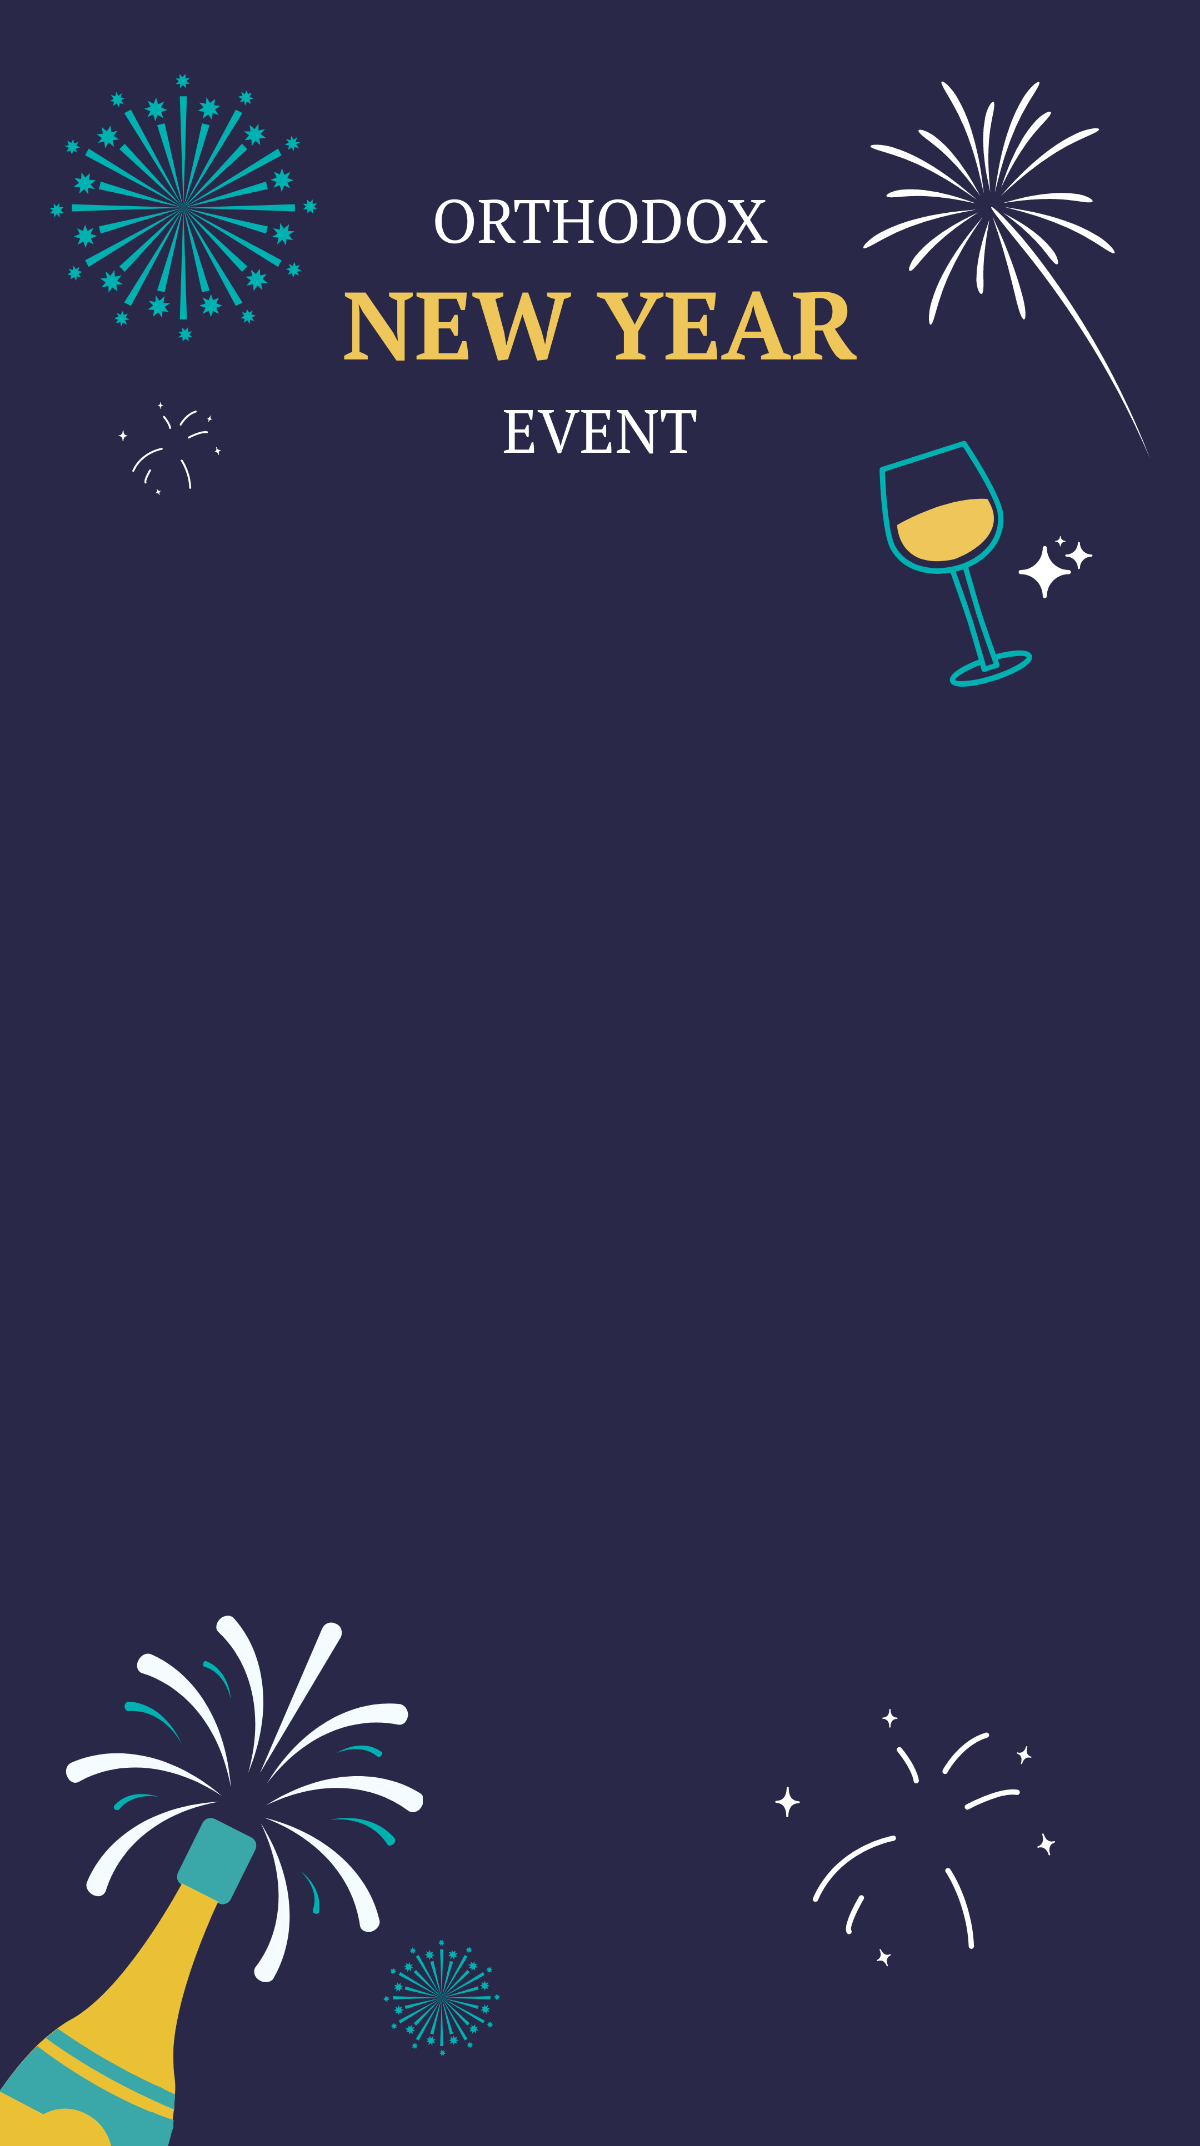 Free Orthodox New Year Event Snapchat Geofilter Template